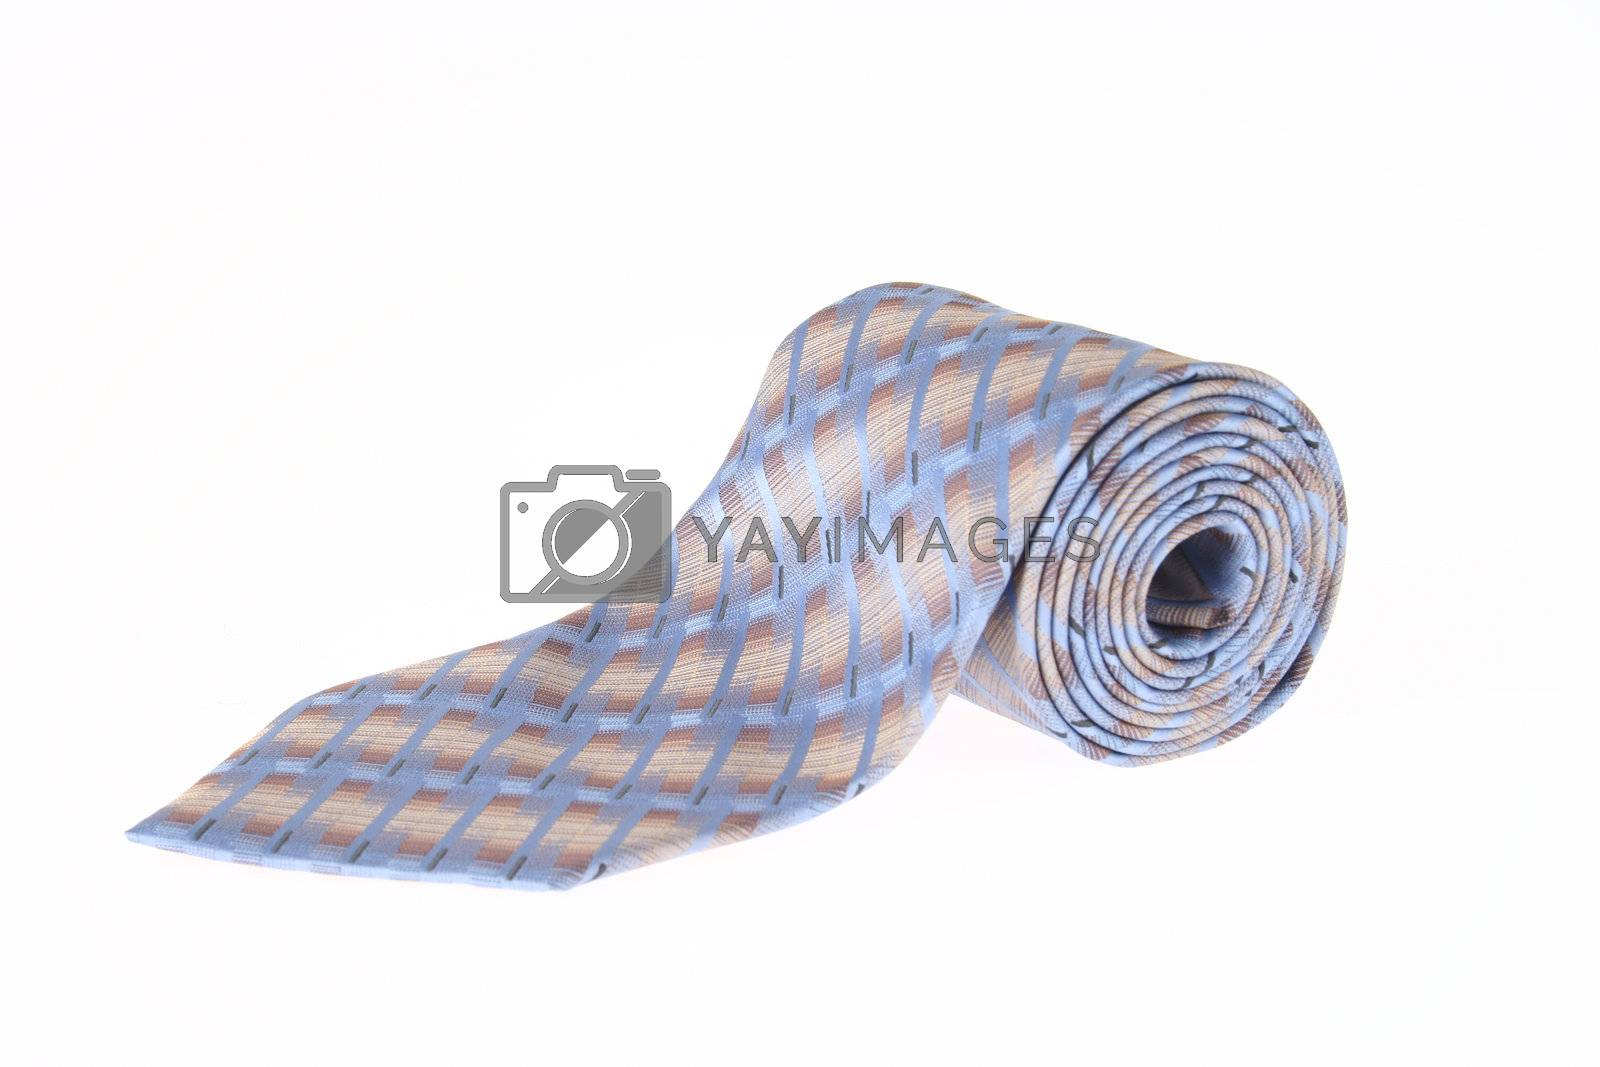 Royalty free image of Isolated Blue Rolled Necktie Close Up by pinkblue